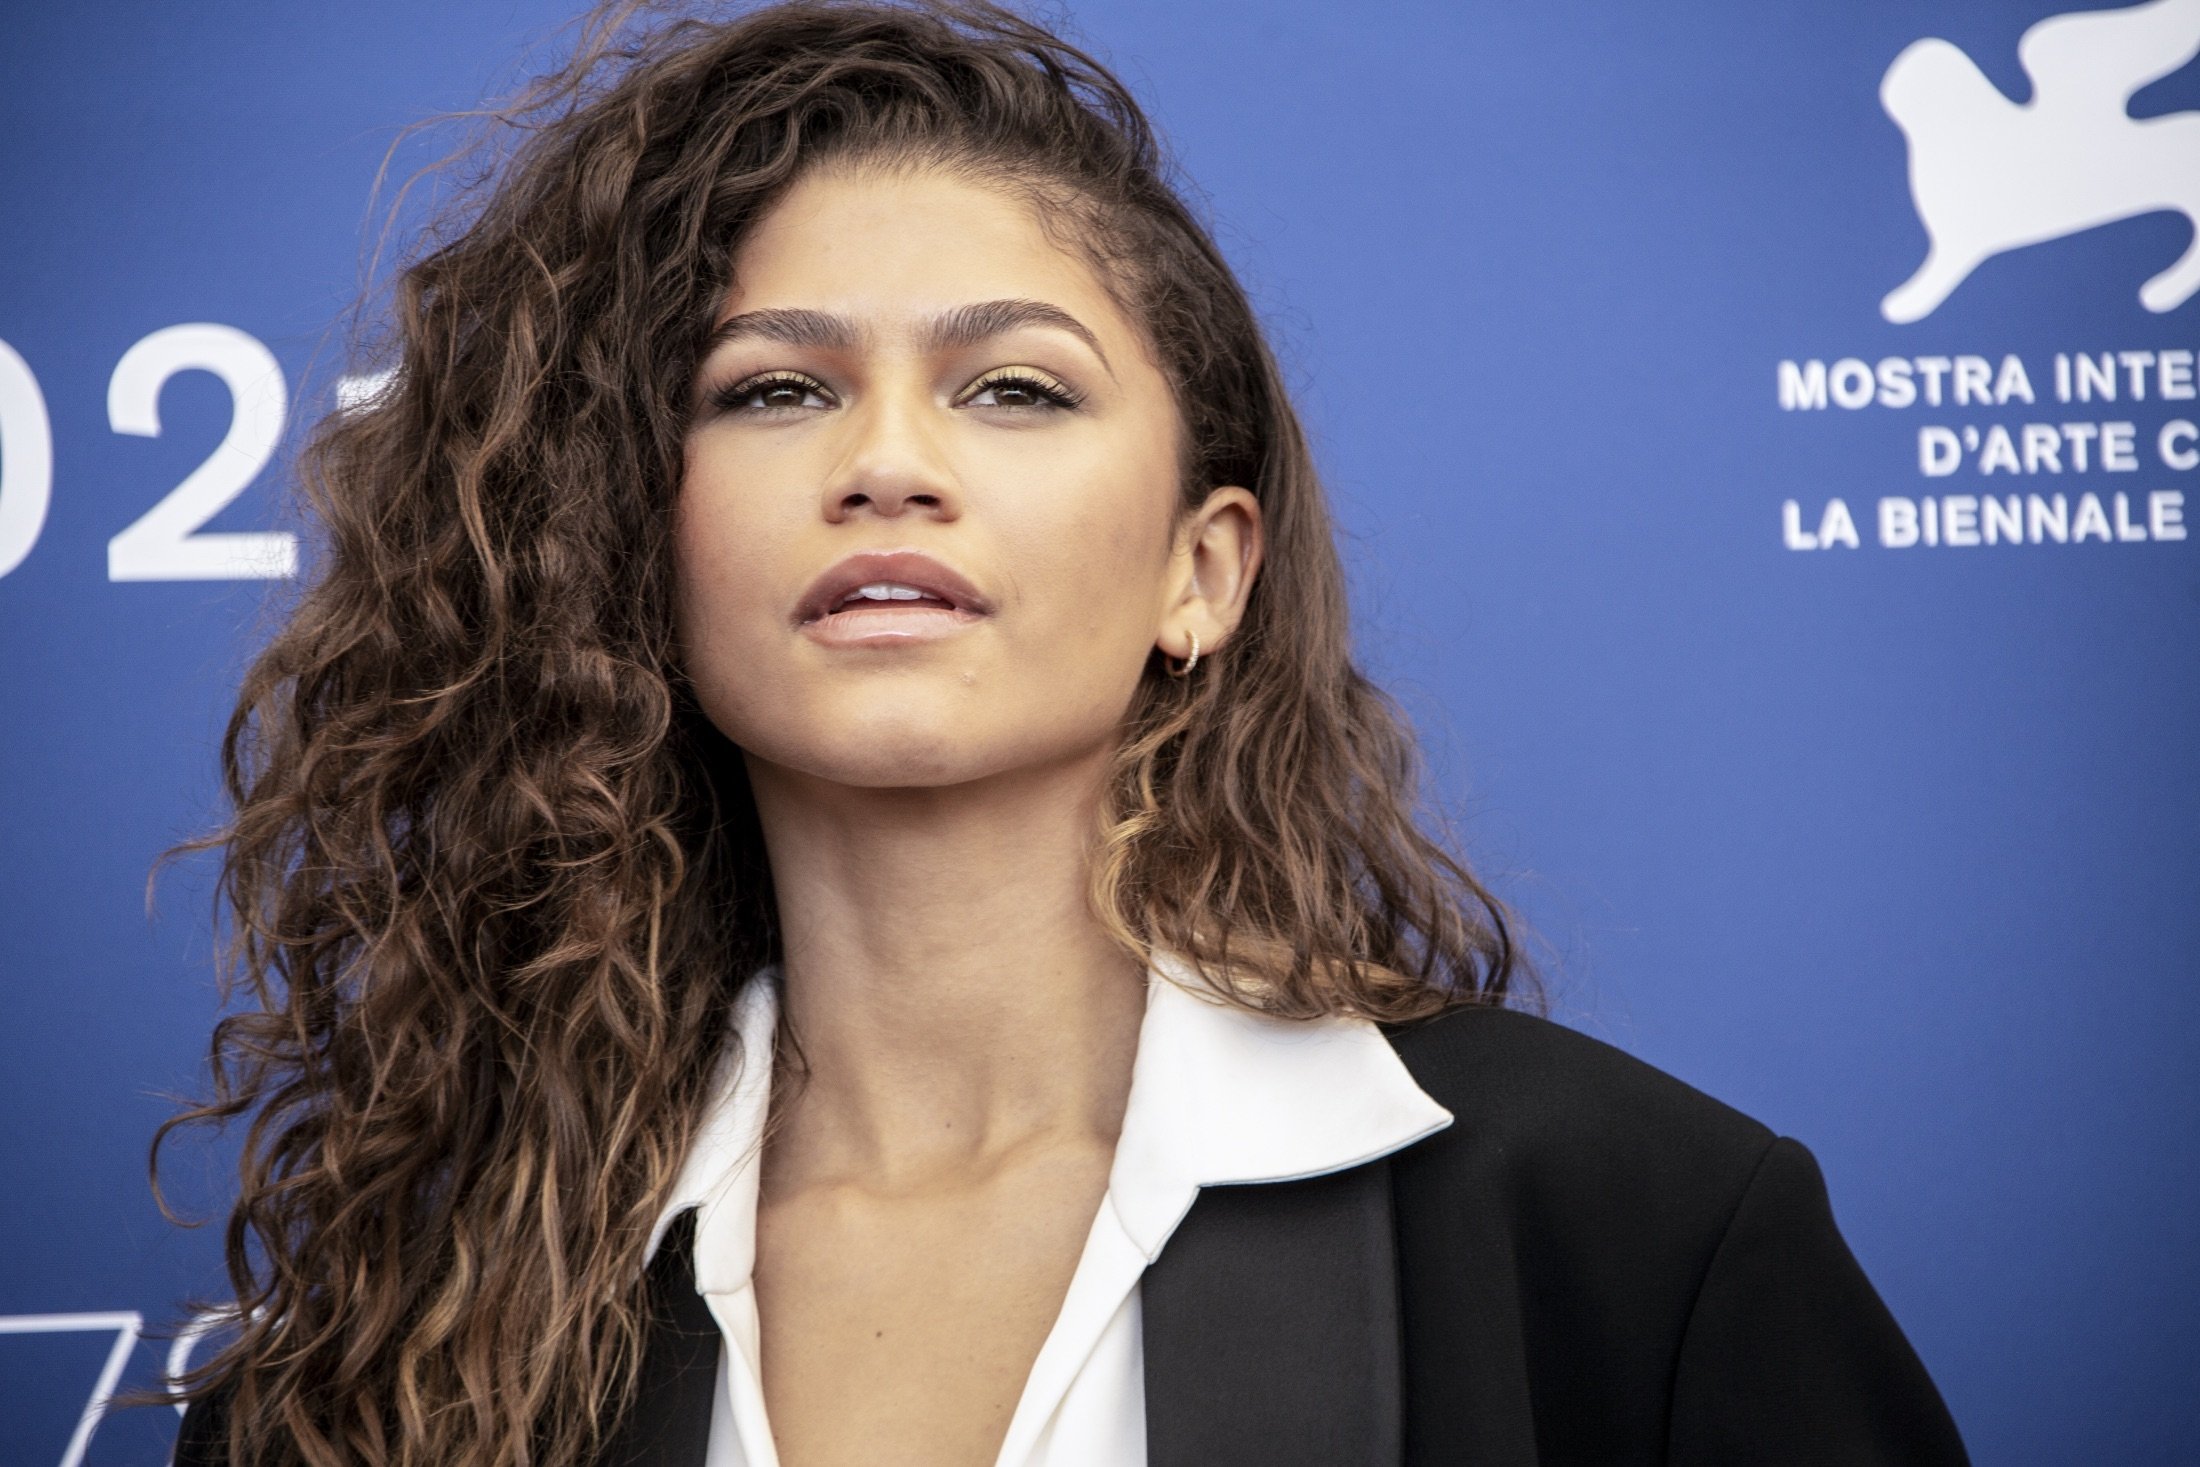 Zendaya poses for photographers at the photocell for the film “Dune” at the 78th Venice Film Festival, in Venice, Italy, Sept. 3, 2021. (AP Photo)